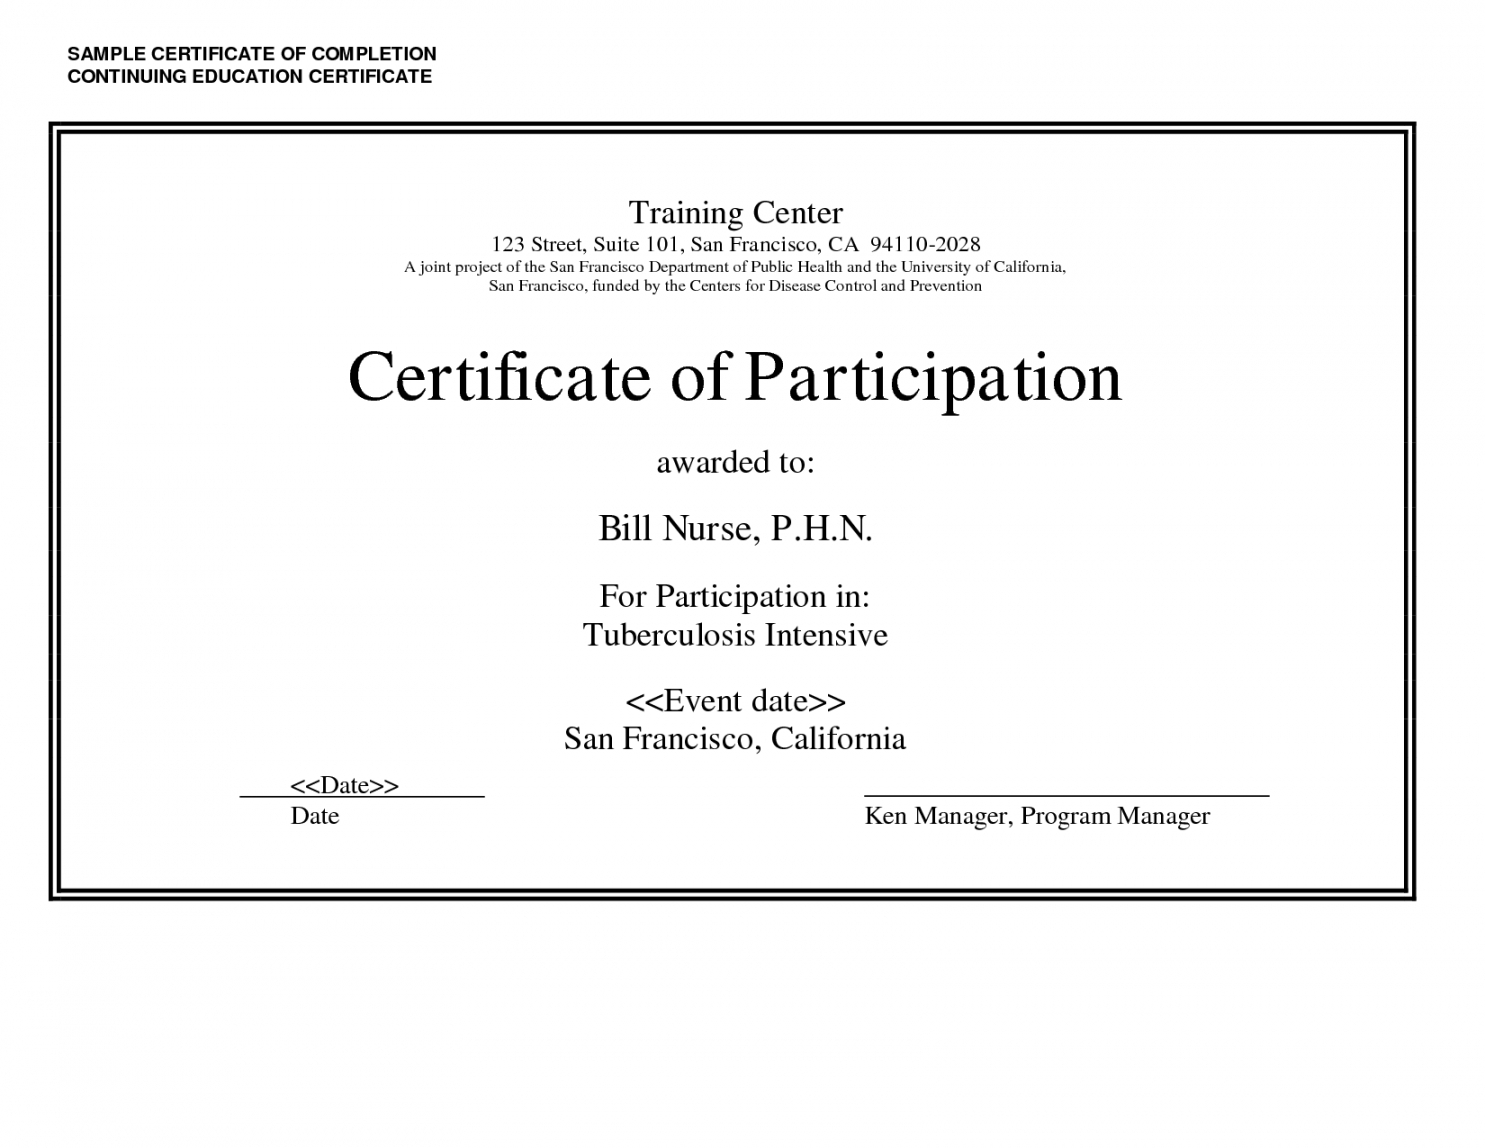 Printable Sample Certificate Of Completion Continuing For Continuing Education Certificate Template